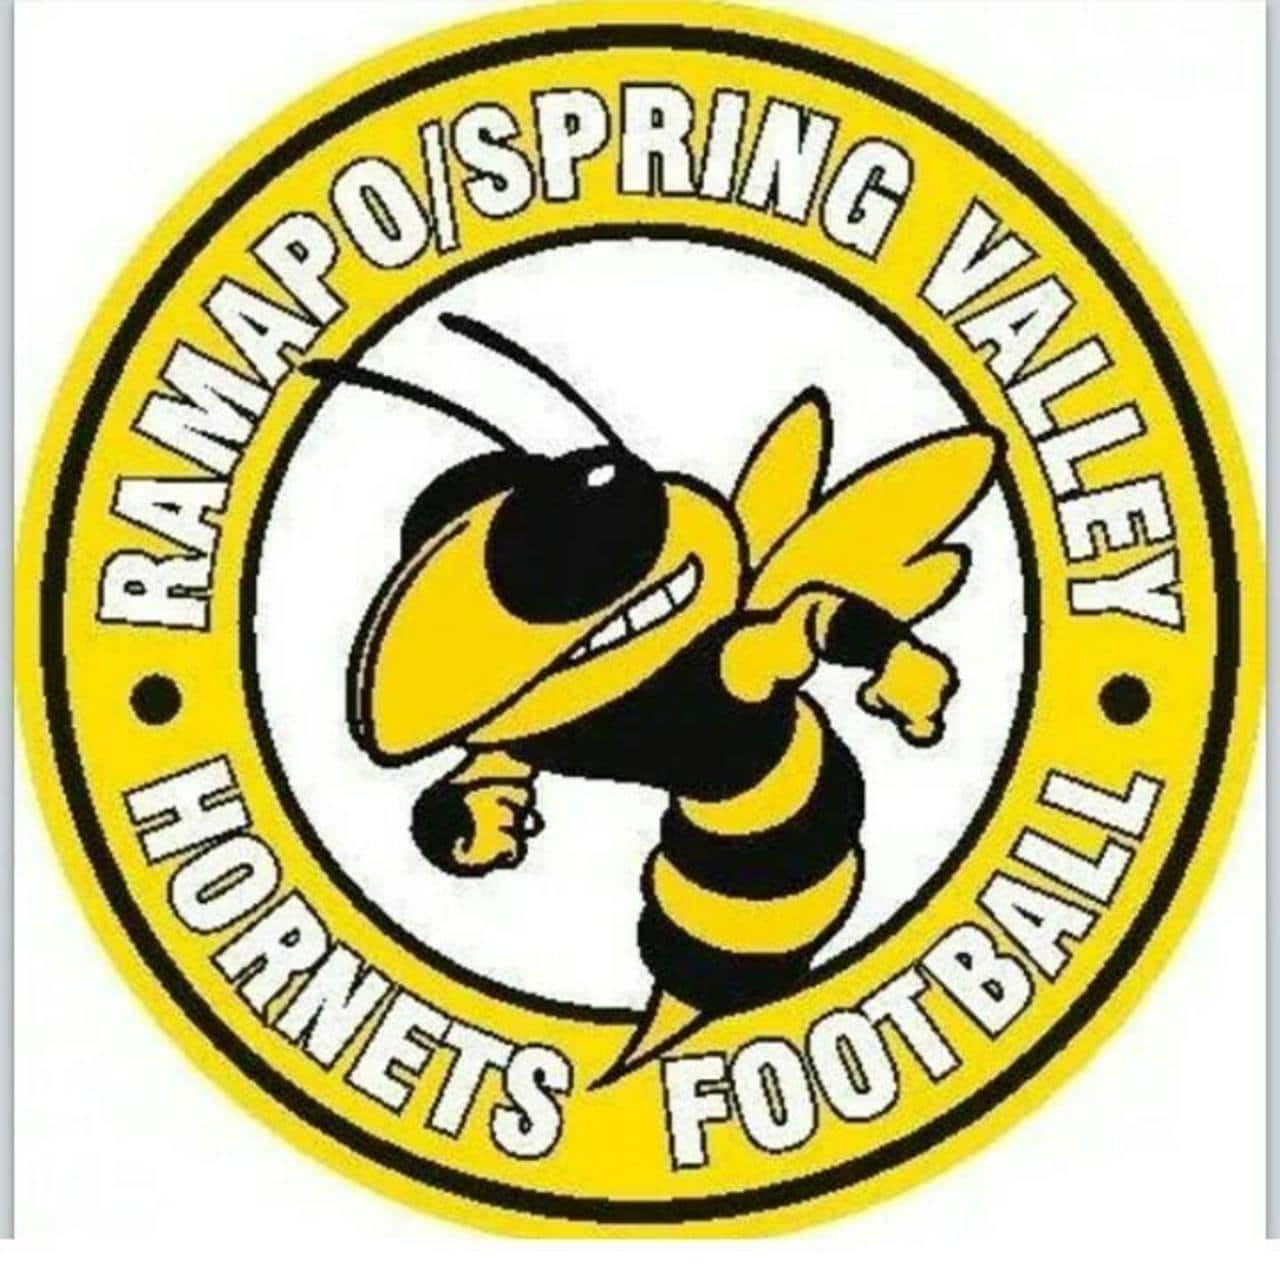 Leadership of the Ramapo/Spring Valley Hornets apparently were aware that one of their youth coaches had a criminal past.